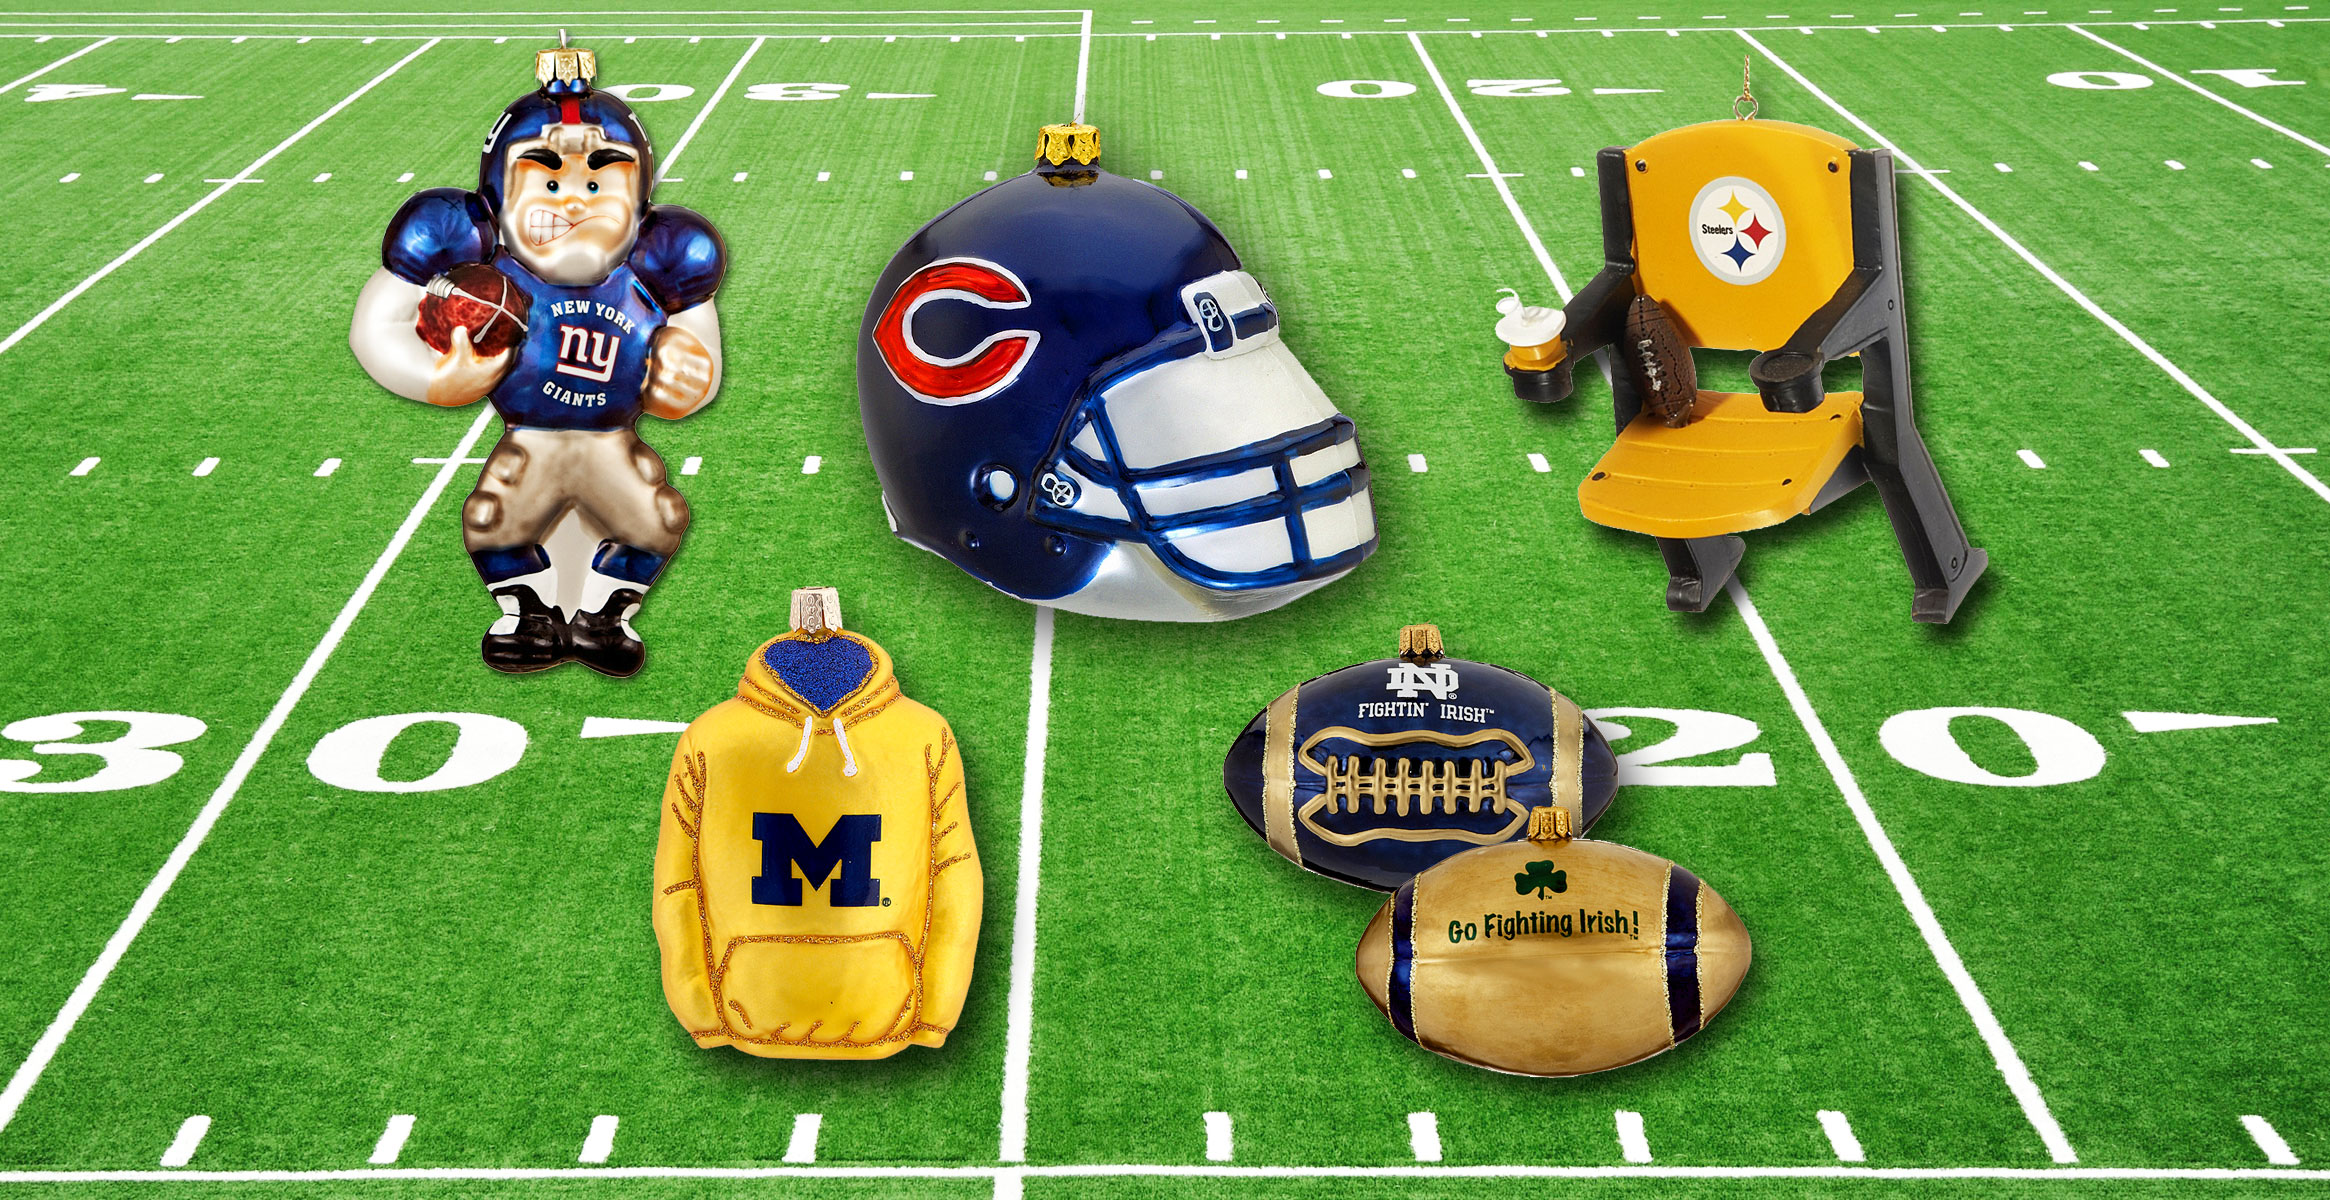 Personalized Gifts For Football Fans | OrnamentShop.com